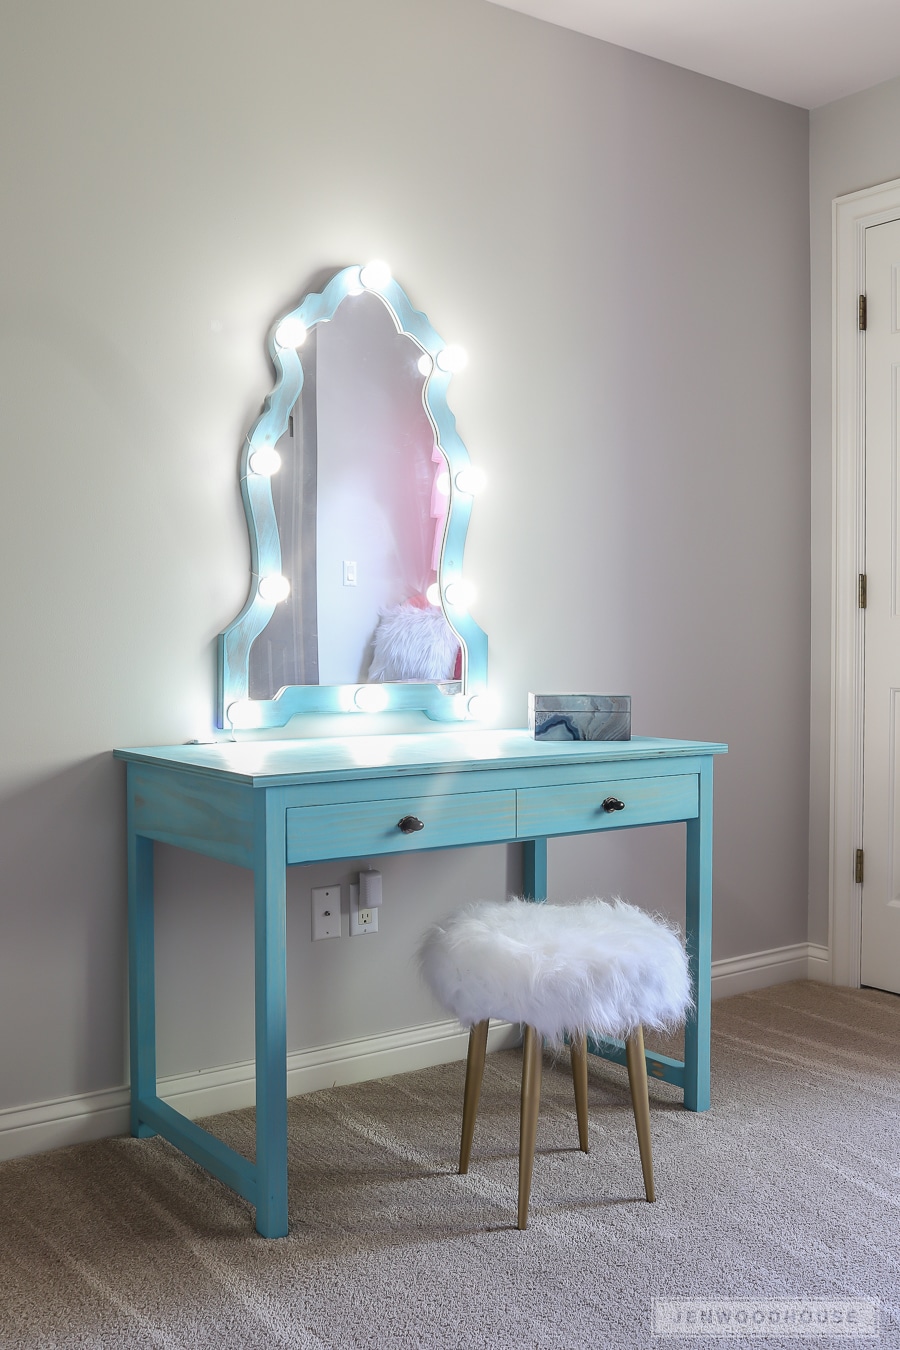 How To Build A Diy Makeup Vanity With, How To Make A Dresser Into Makeup Vanity